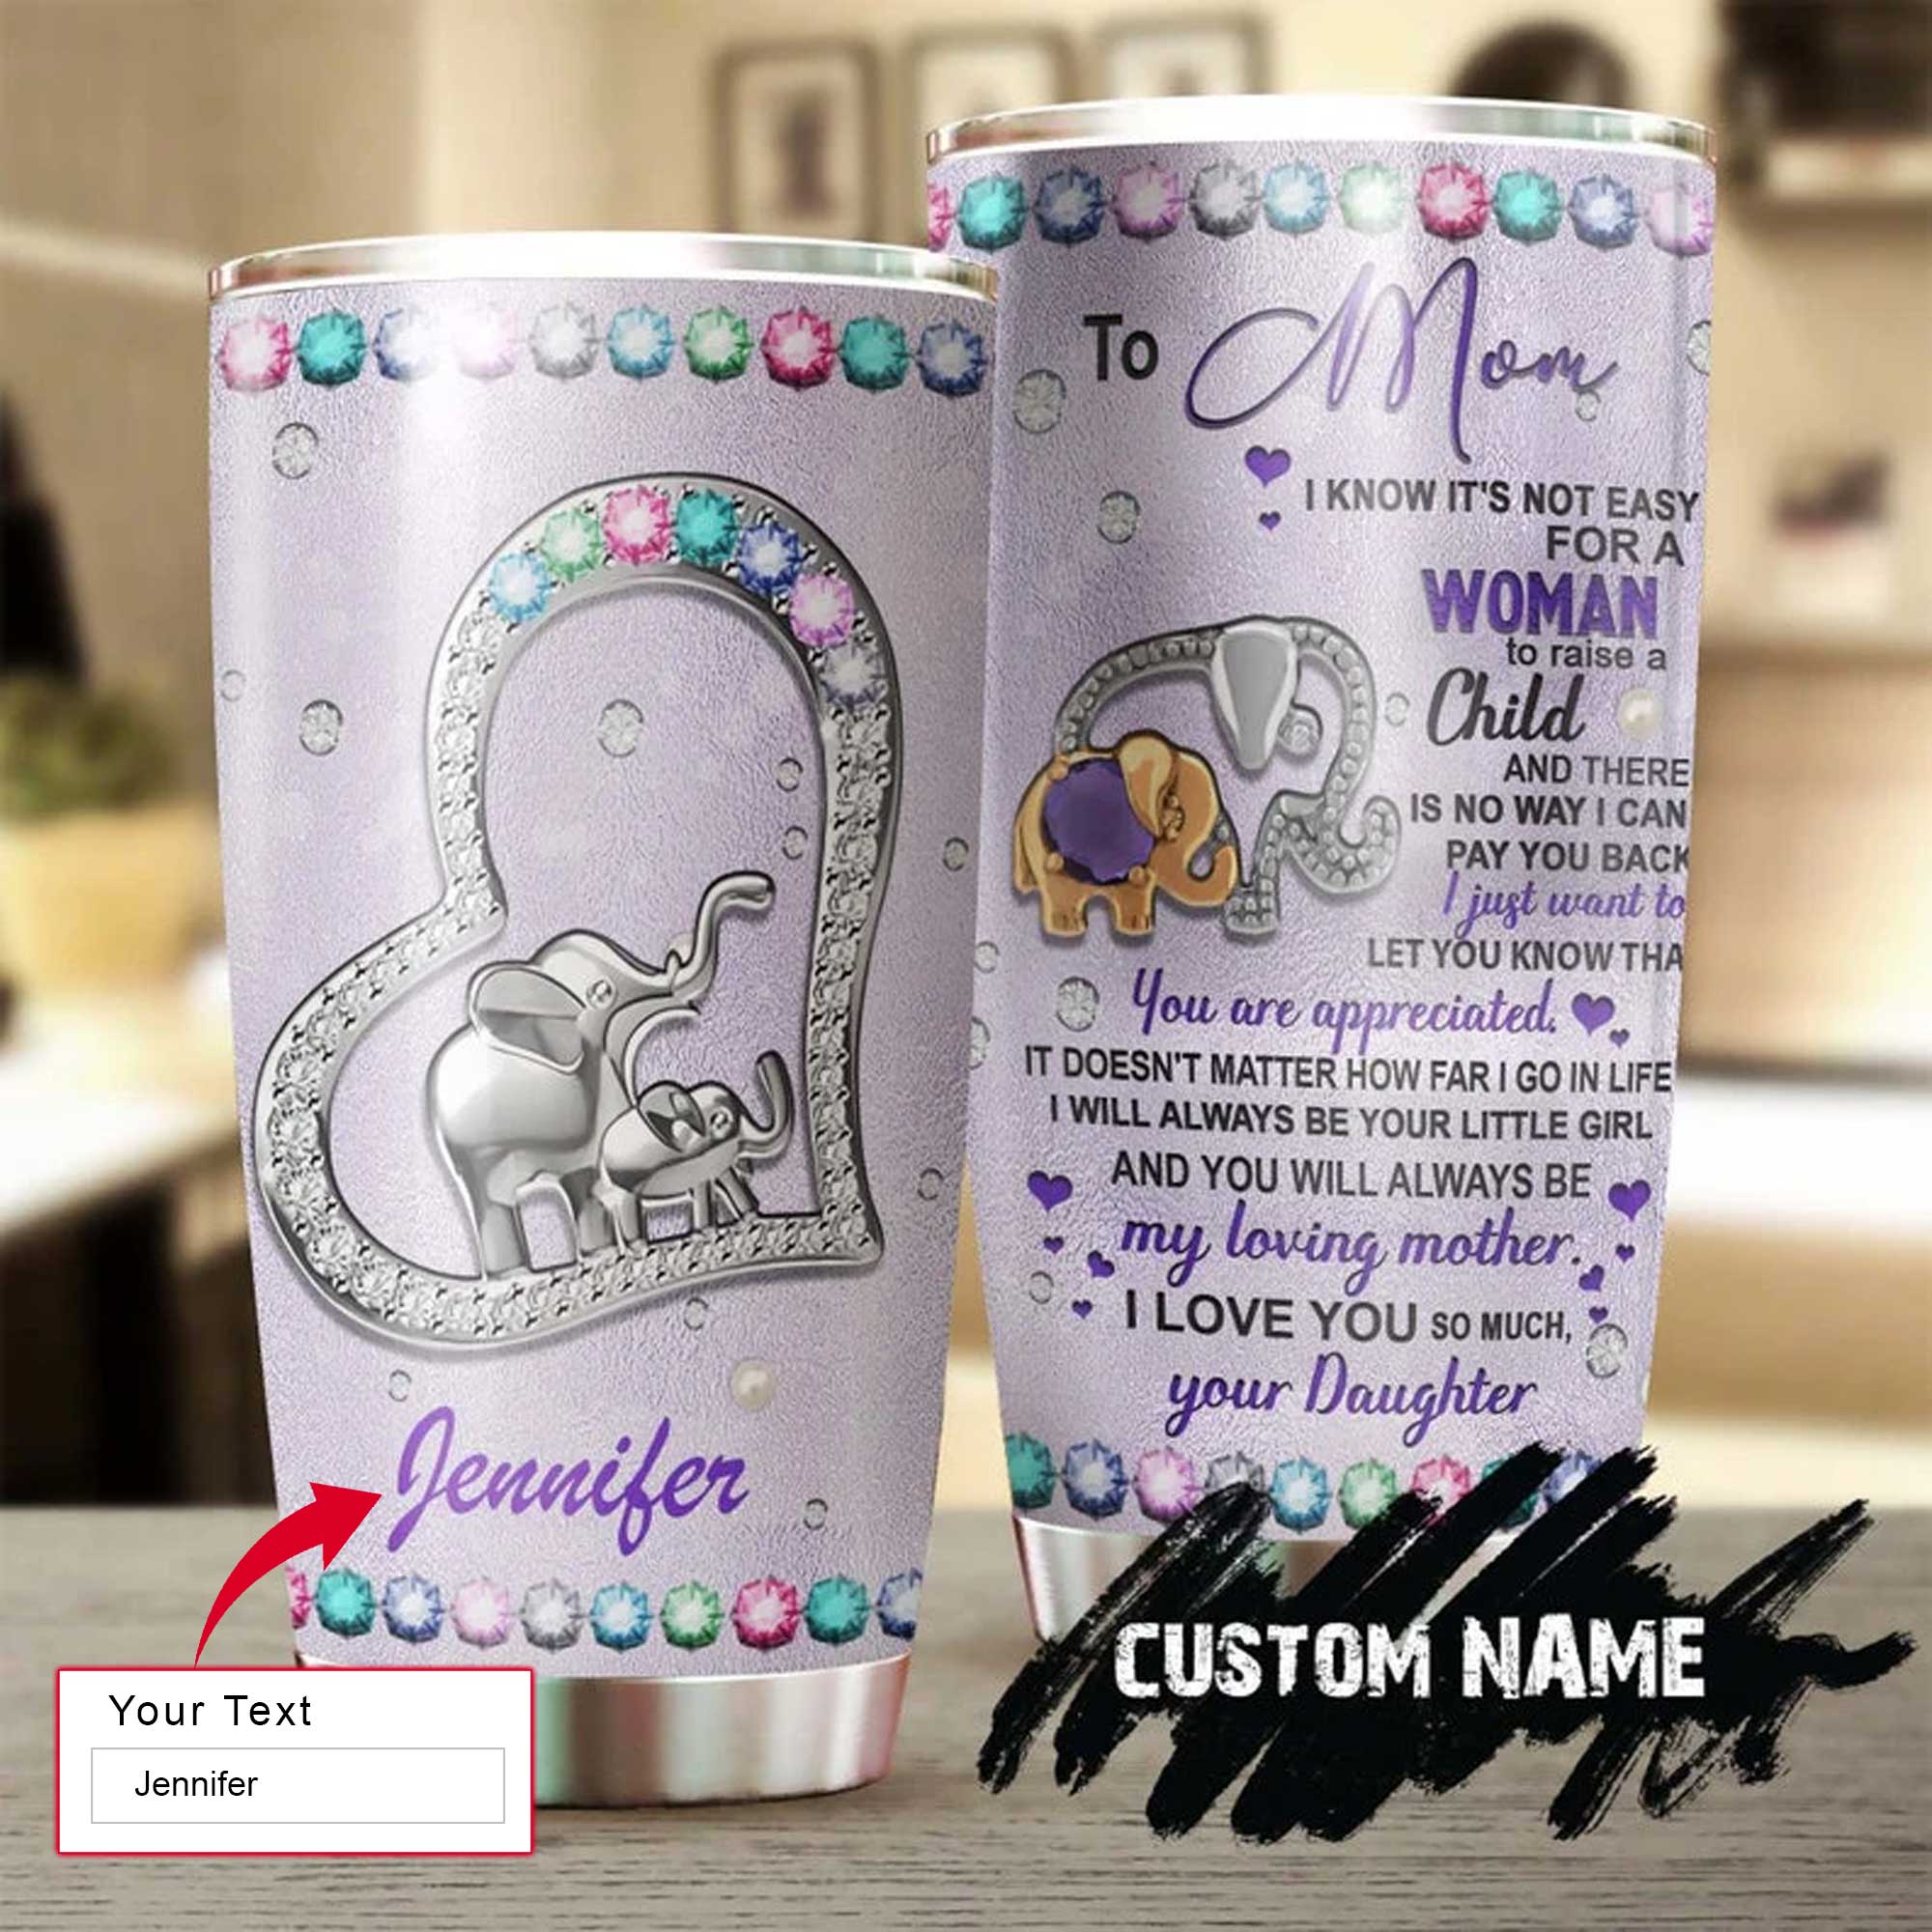 Personalized Mother's Day Gift Tumbler - Custom Gift For Mother's Day, Presents For Mom From Daughter Son - Elephant Mom I Love You So Much Tumbler